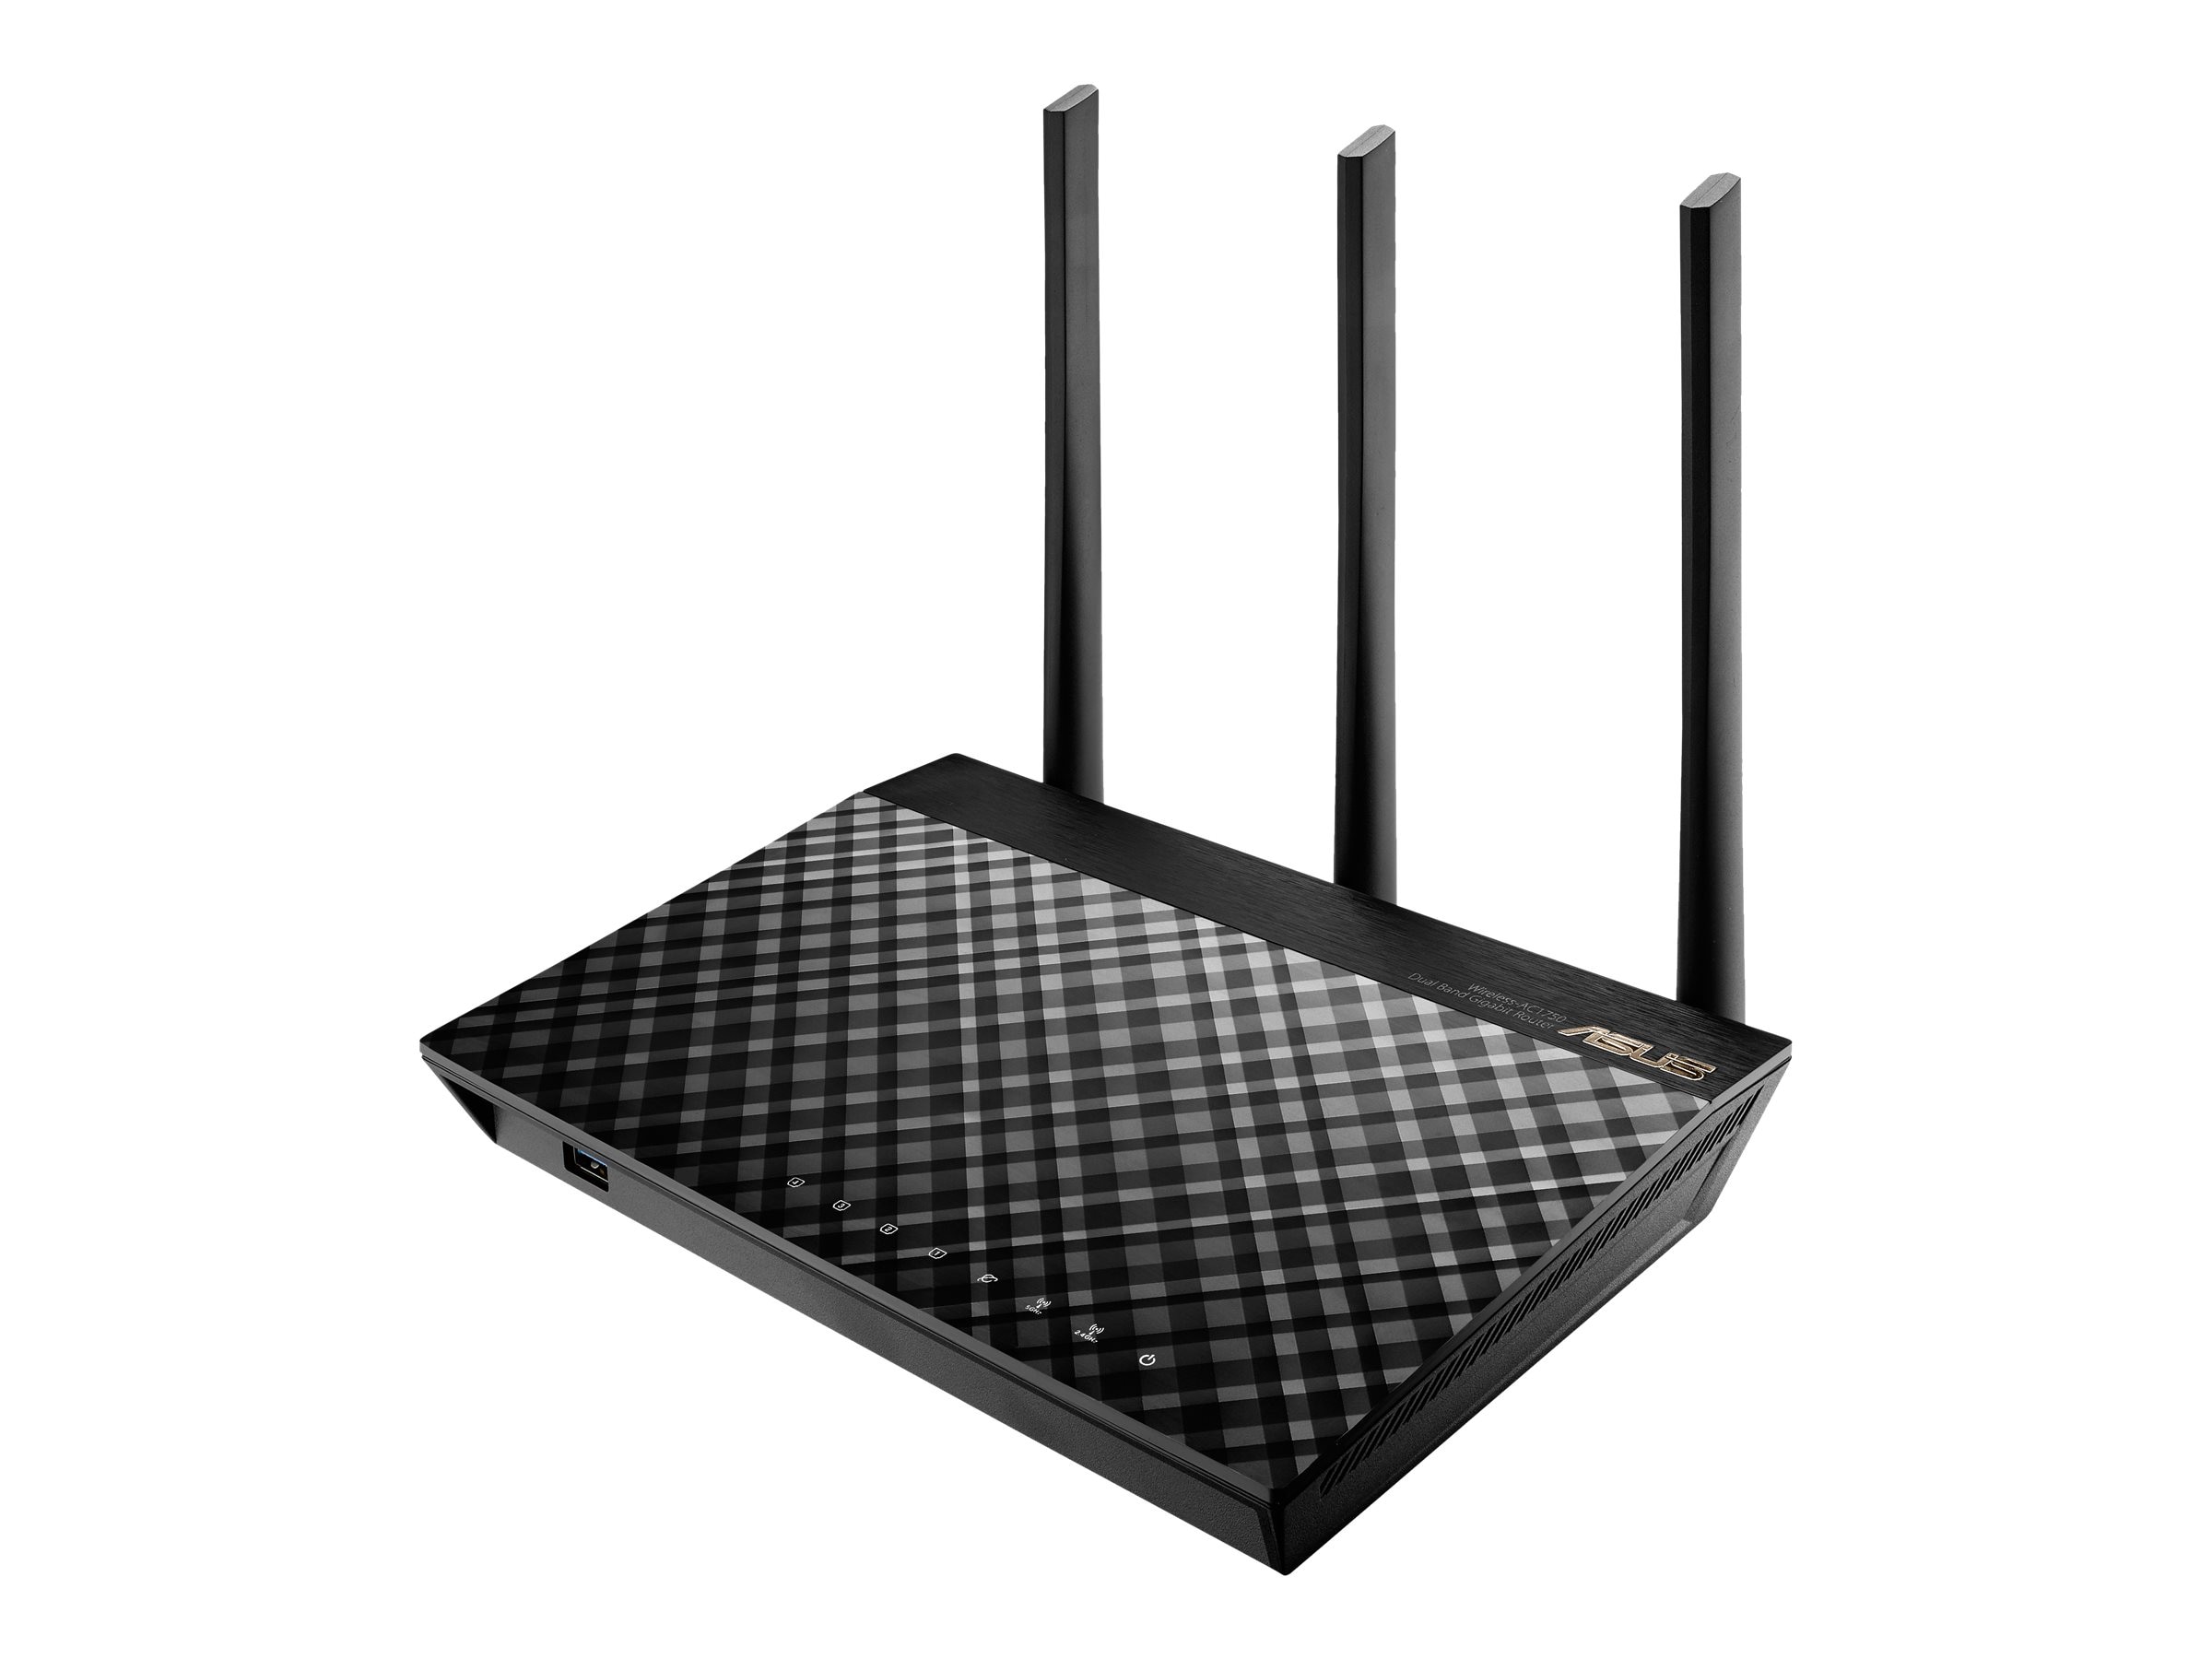 Asus Dual-band Wireless-AC1750 Router (RT-AC66U B1)